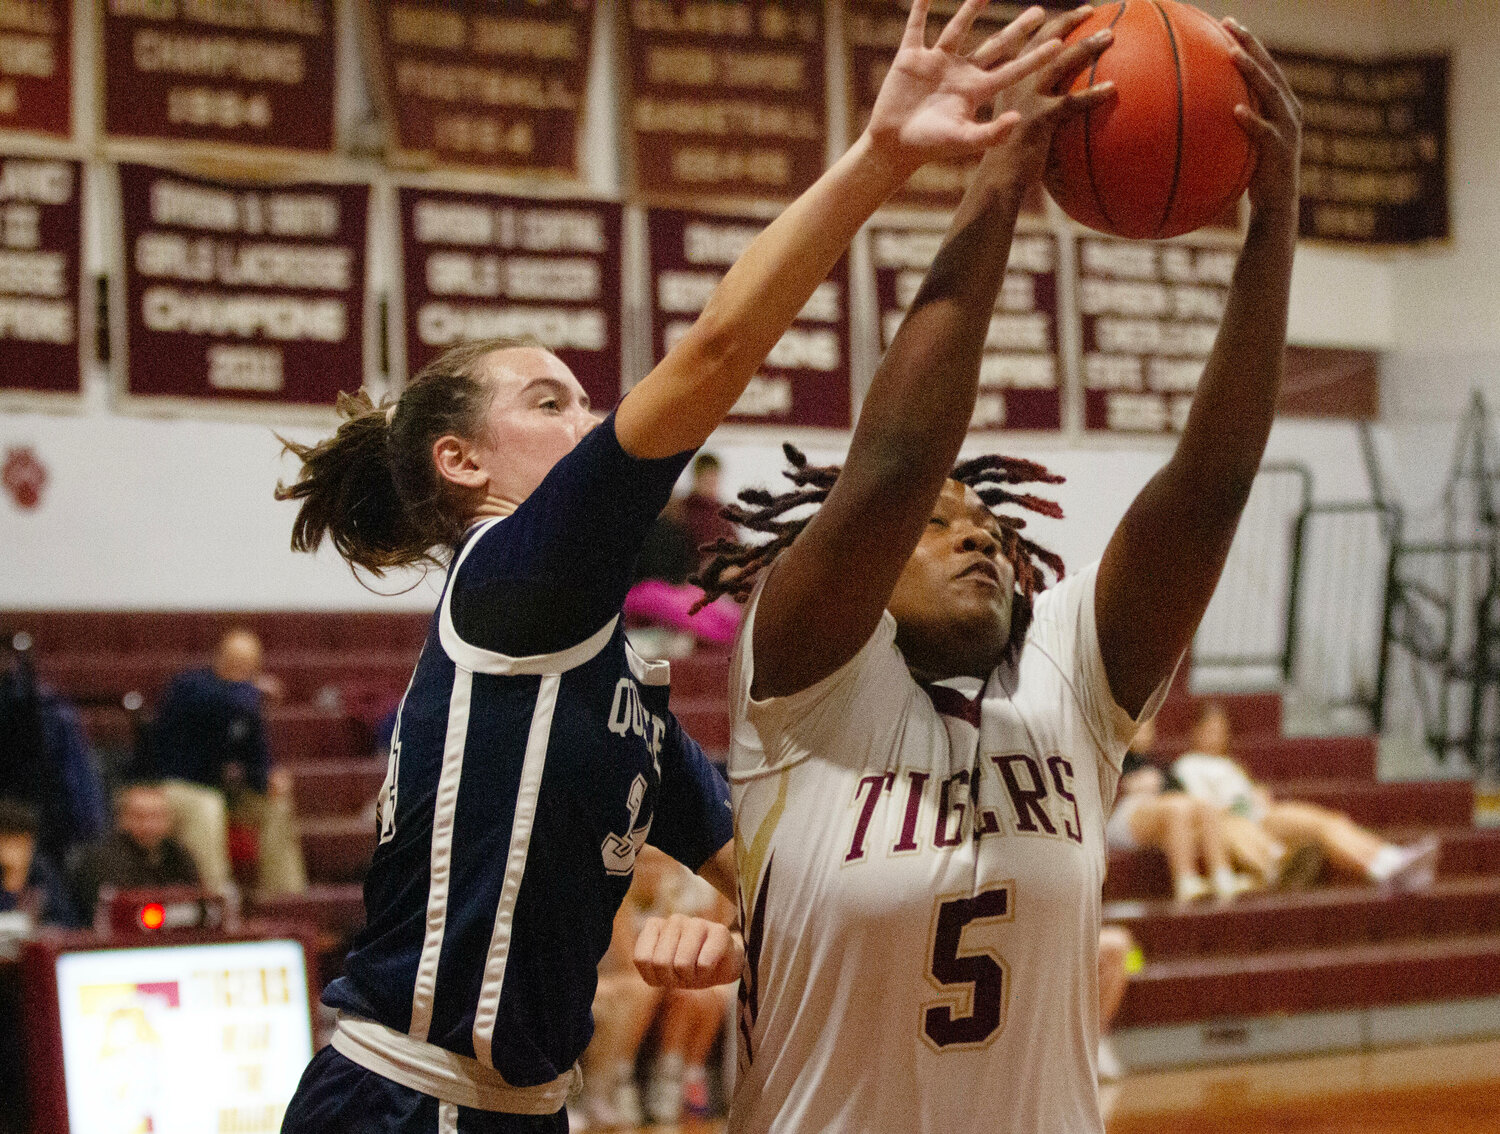 Jah'niece Branch pulls down a rebound in the first half of the Tiger's loss to Moses Brown on Thursday night. Branch led the team in scoring with 12 points.